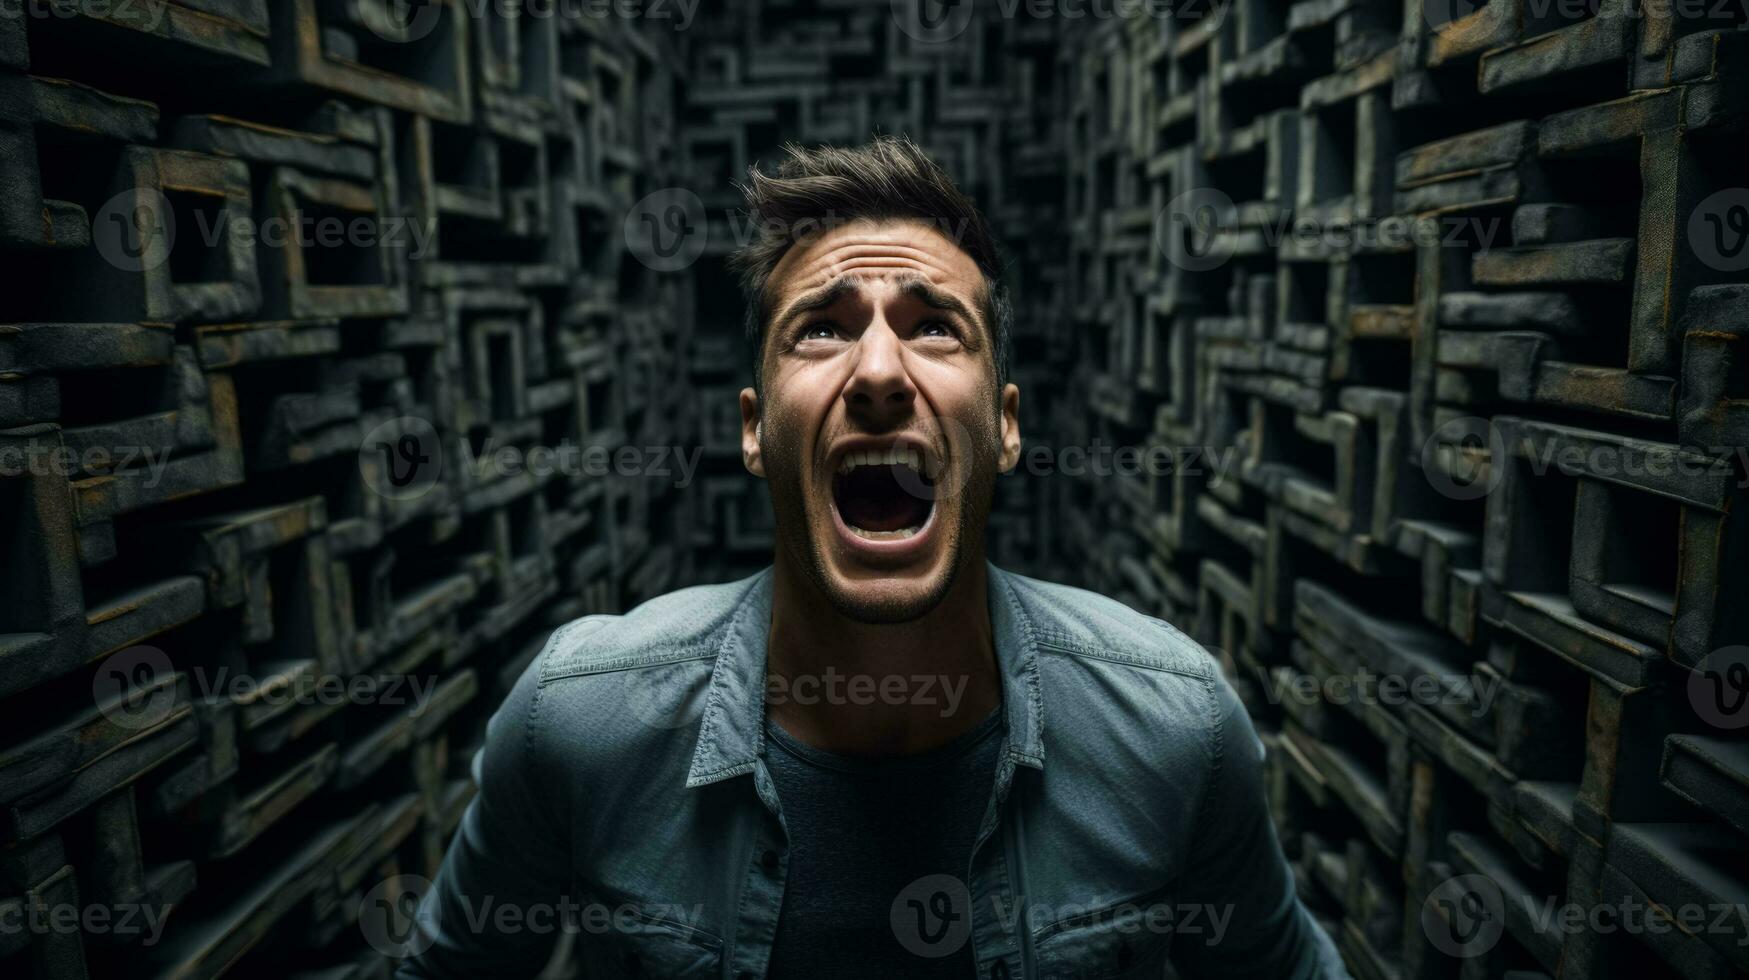 Being lost in a maze shocked screaming portrait of a man dark background with a place for text photo